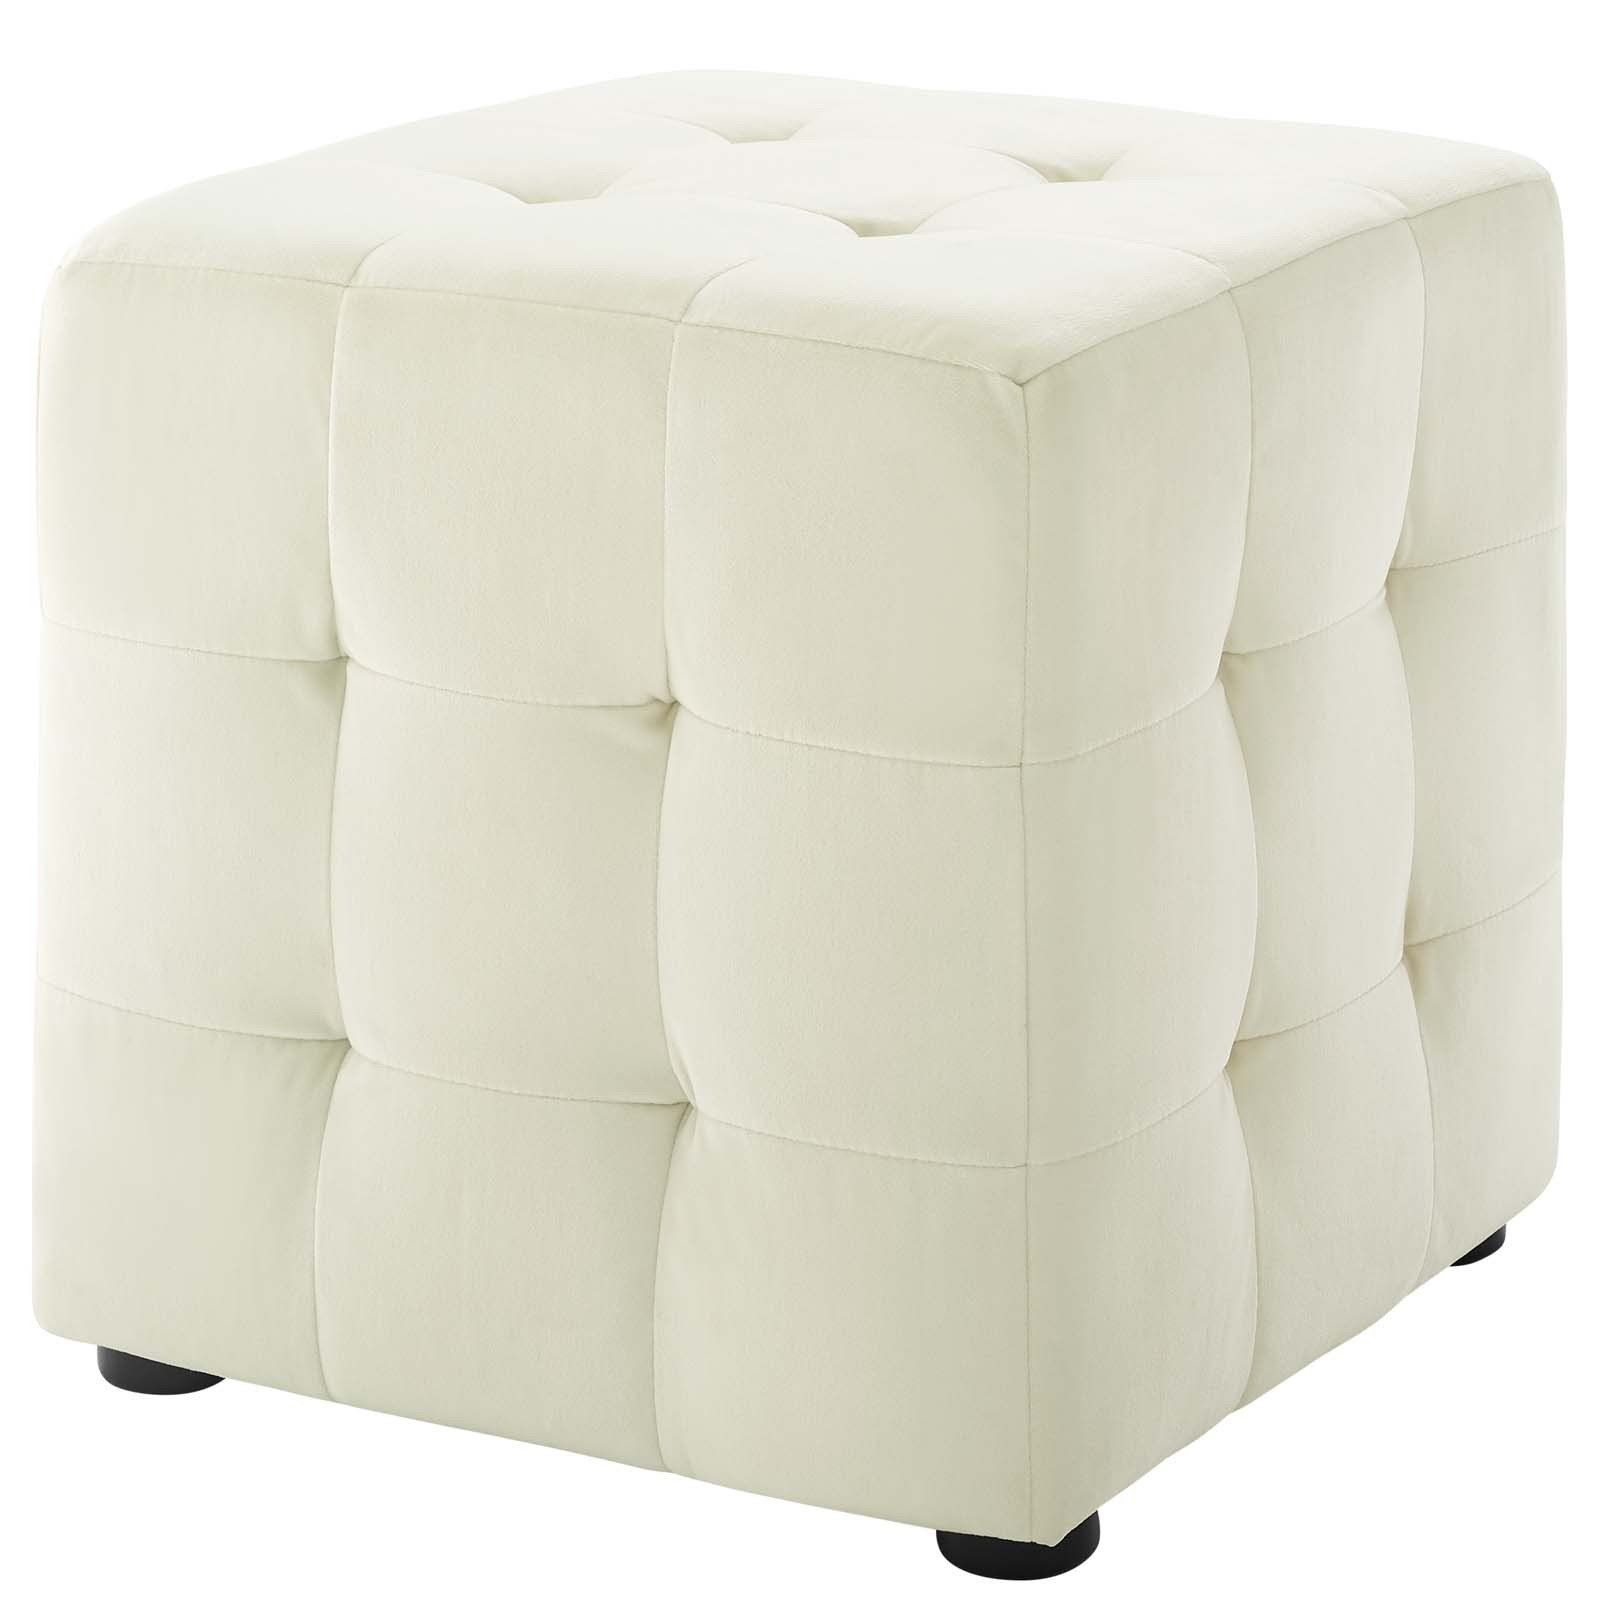 Current Contour Ivory Tufted Cube Performance Velvet Ottoman Eei 3577 Ivo Throughout Light Blue And Gray Solid Cube Pouf Ottomans (View 4 of 10)